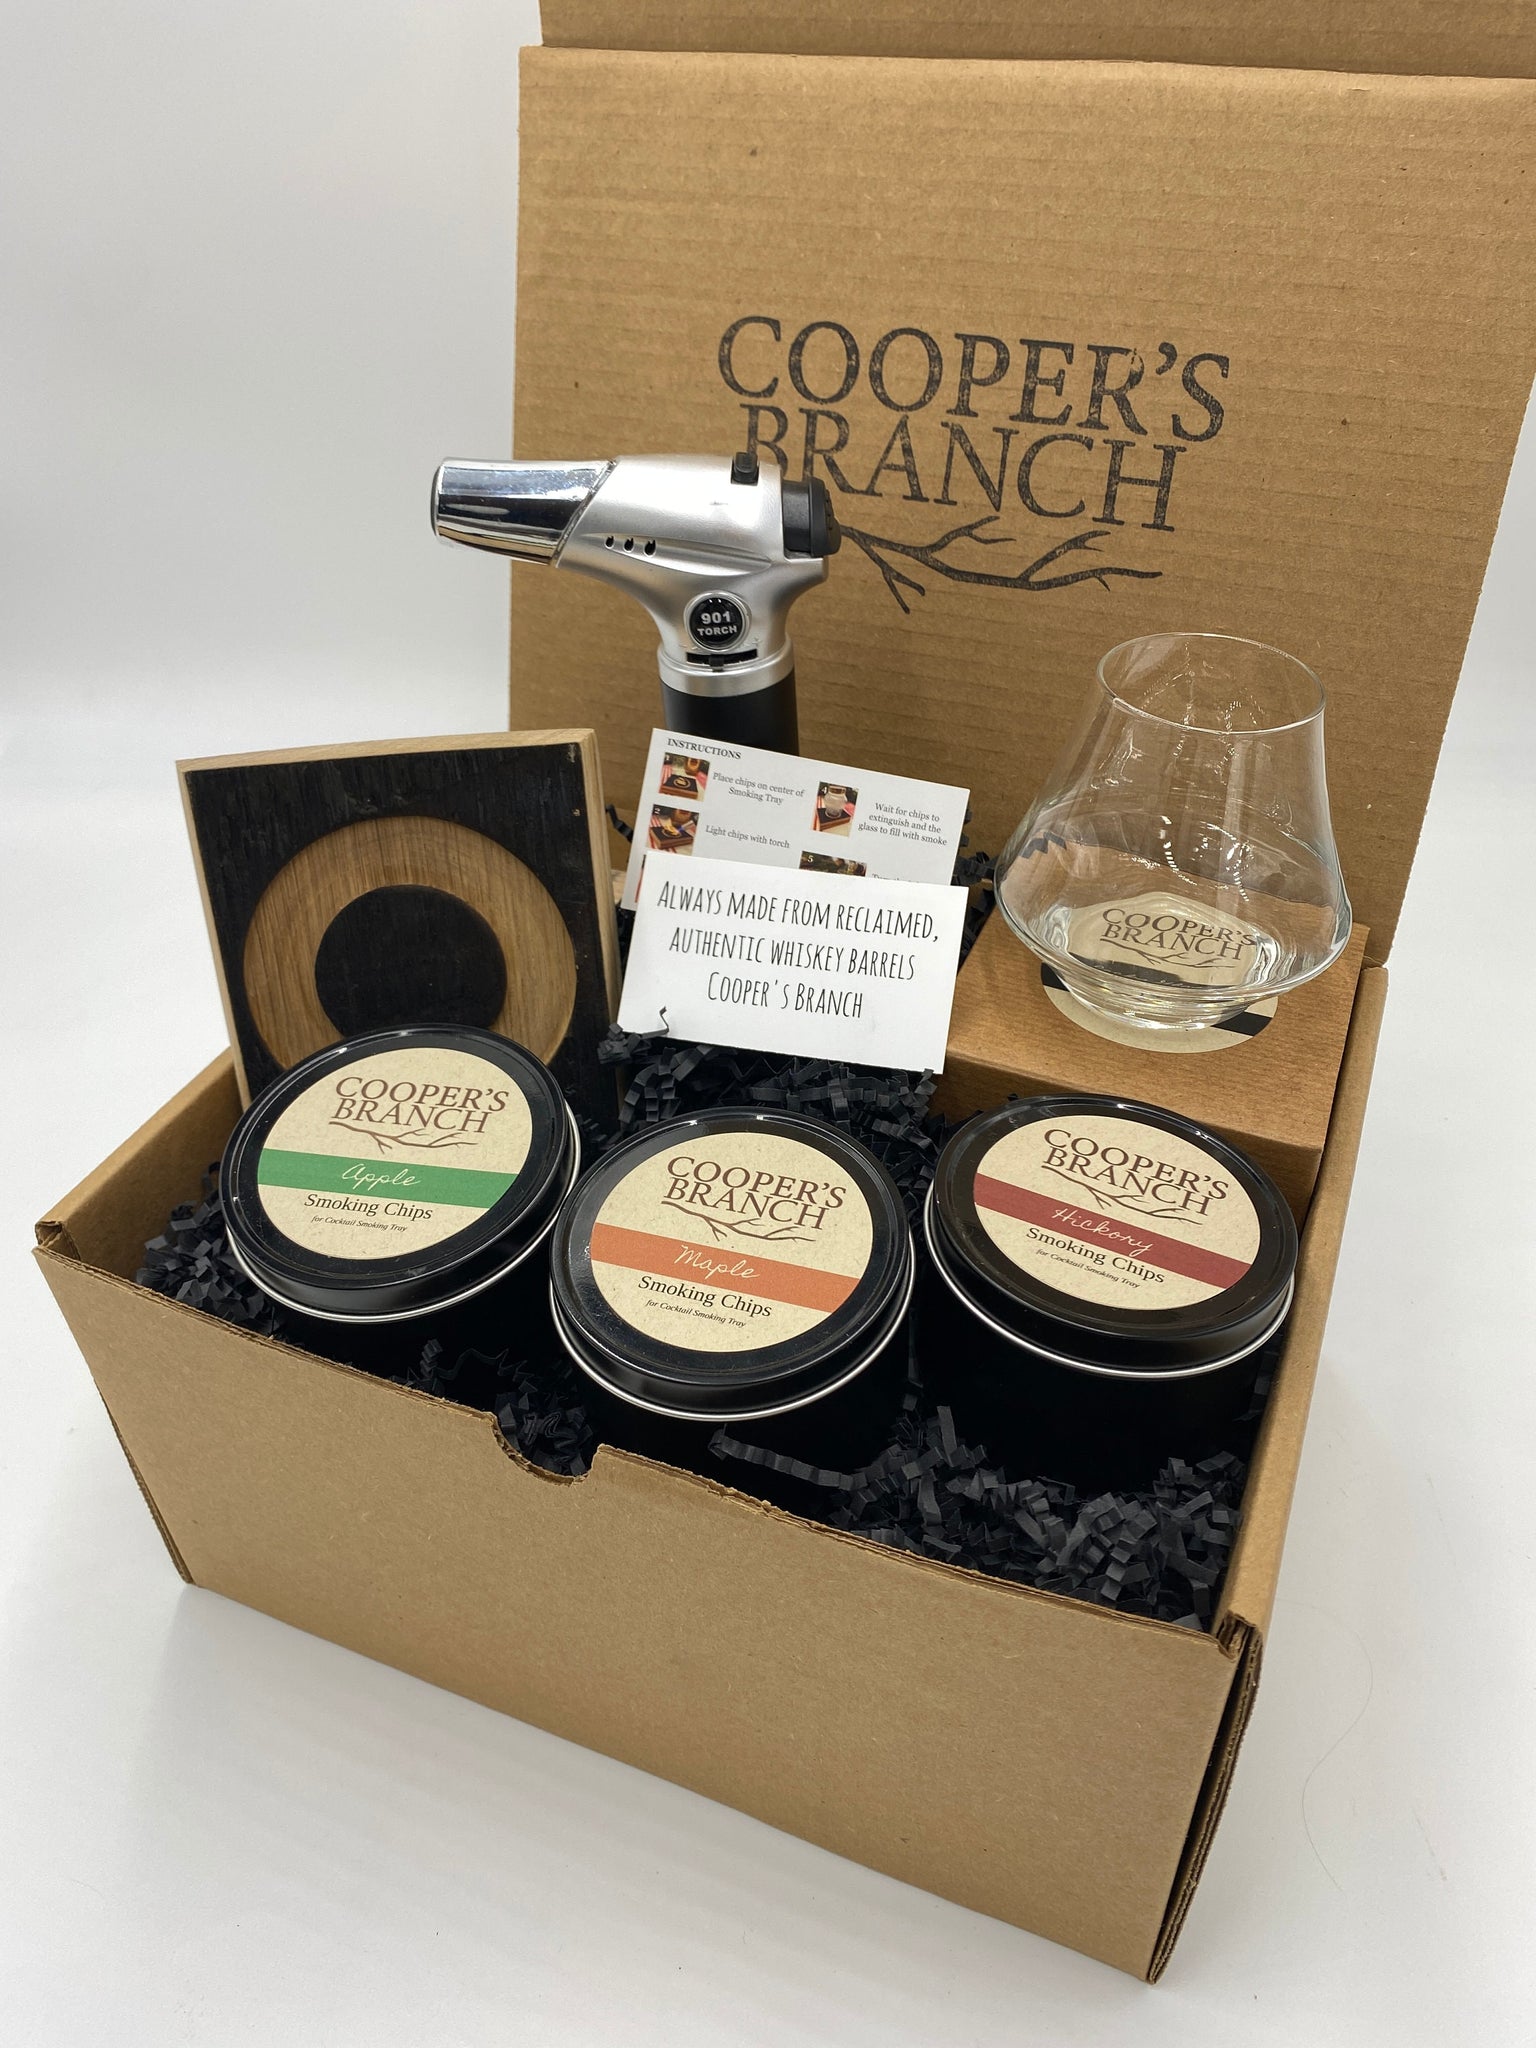 Smoked Cocktail Kit Gift Set with Smoking Chips & Torch